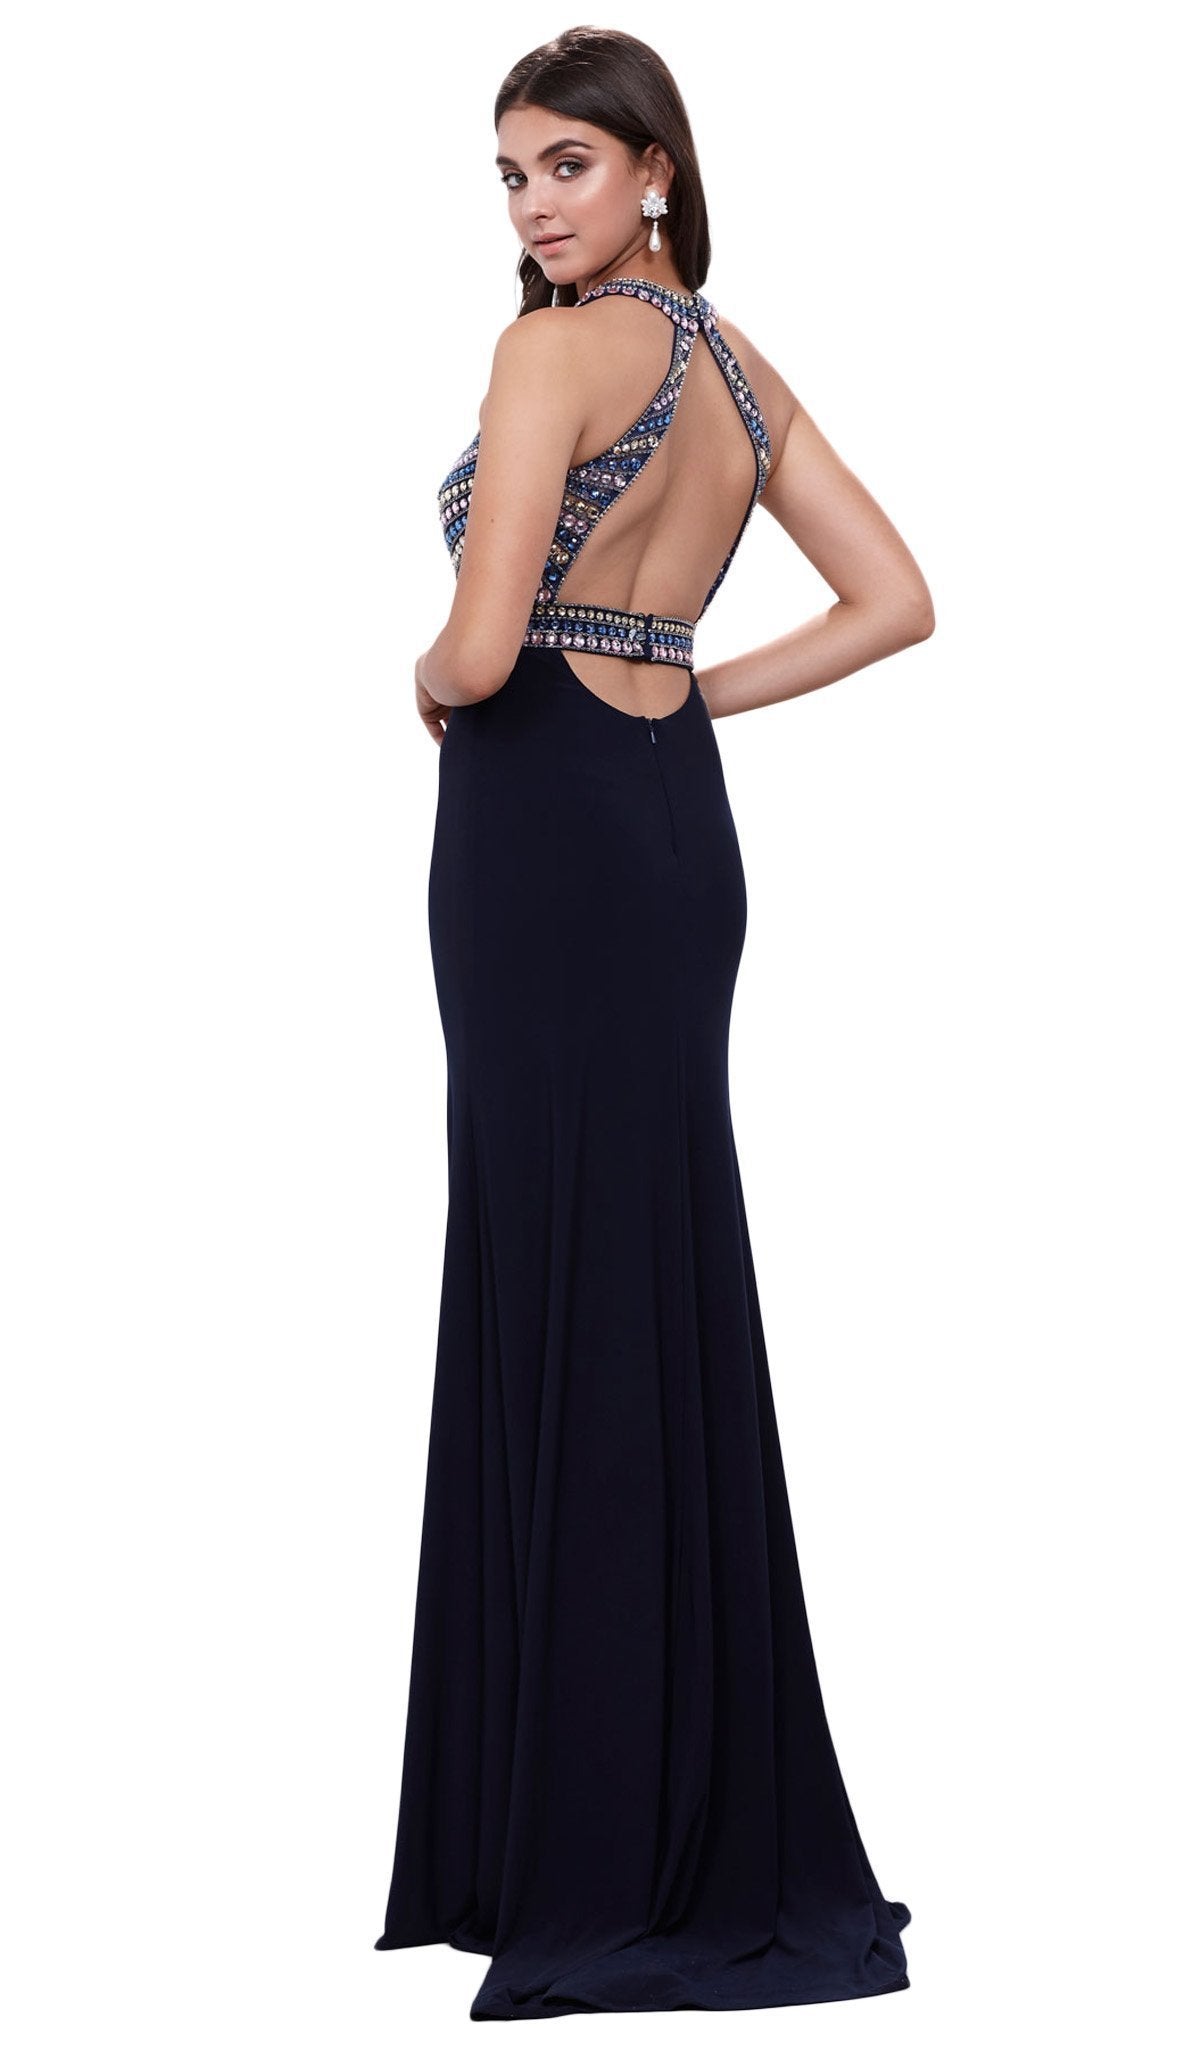 Nox Anabel - 8321 Rhinestone Embellished Halter Illusion Evening Gown Special Occasion Dress